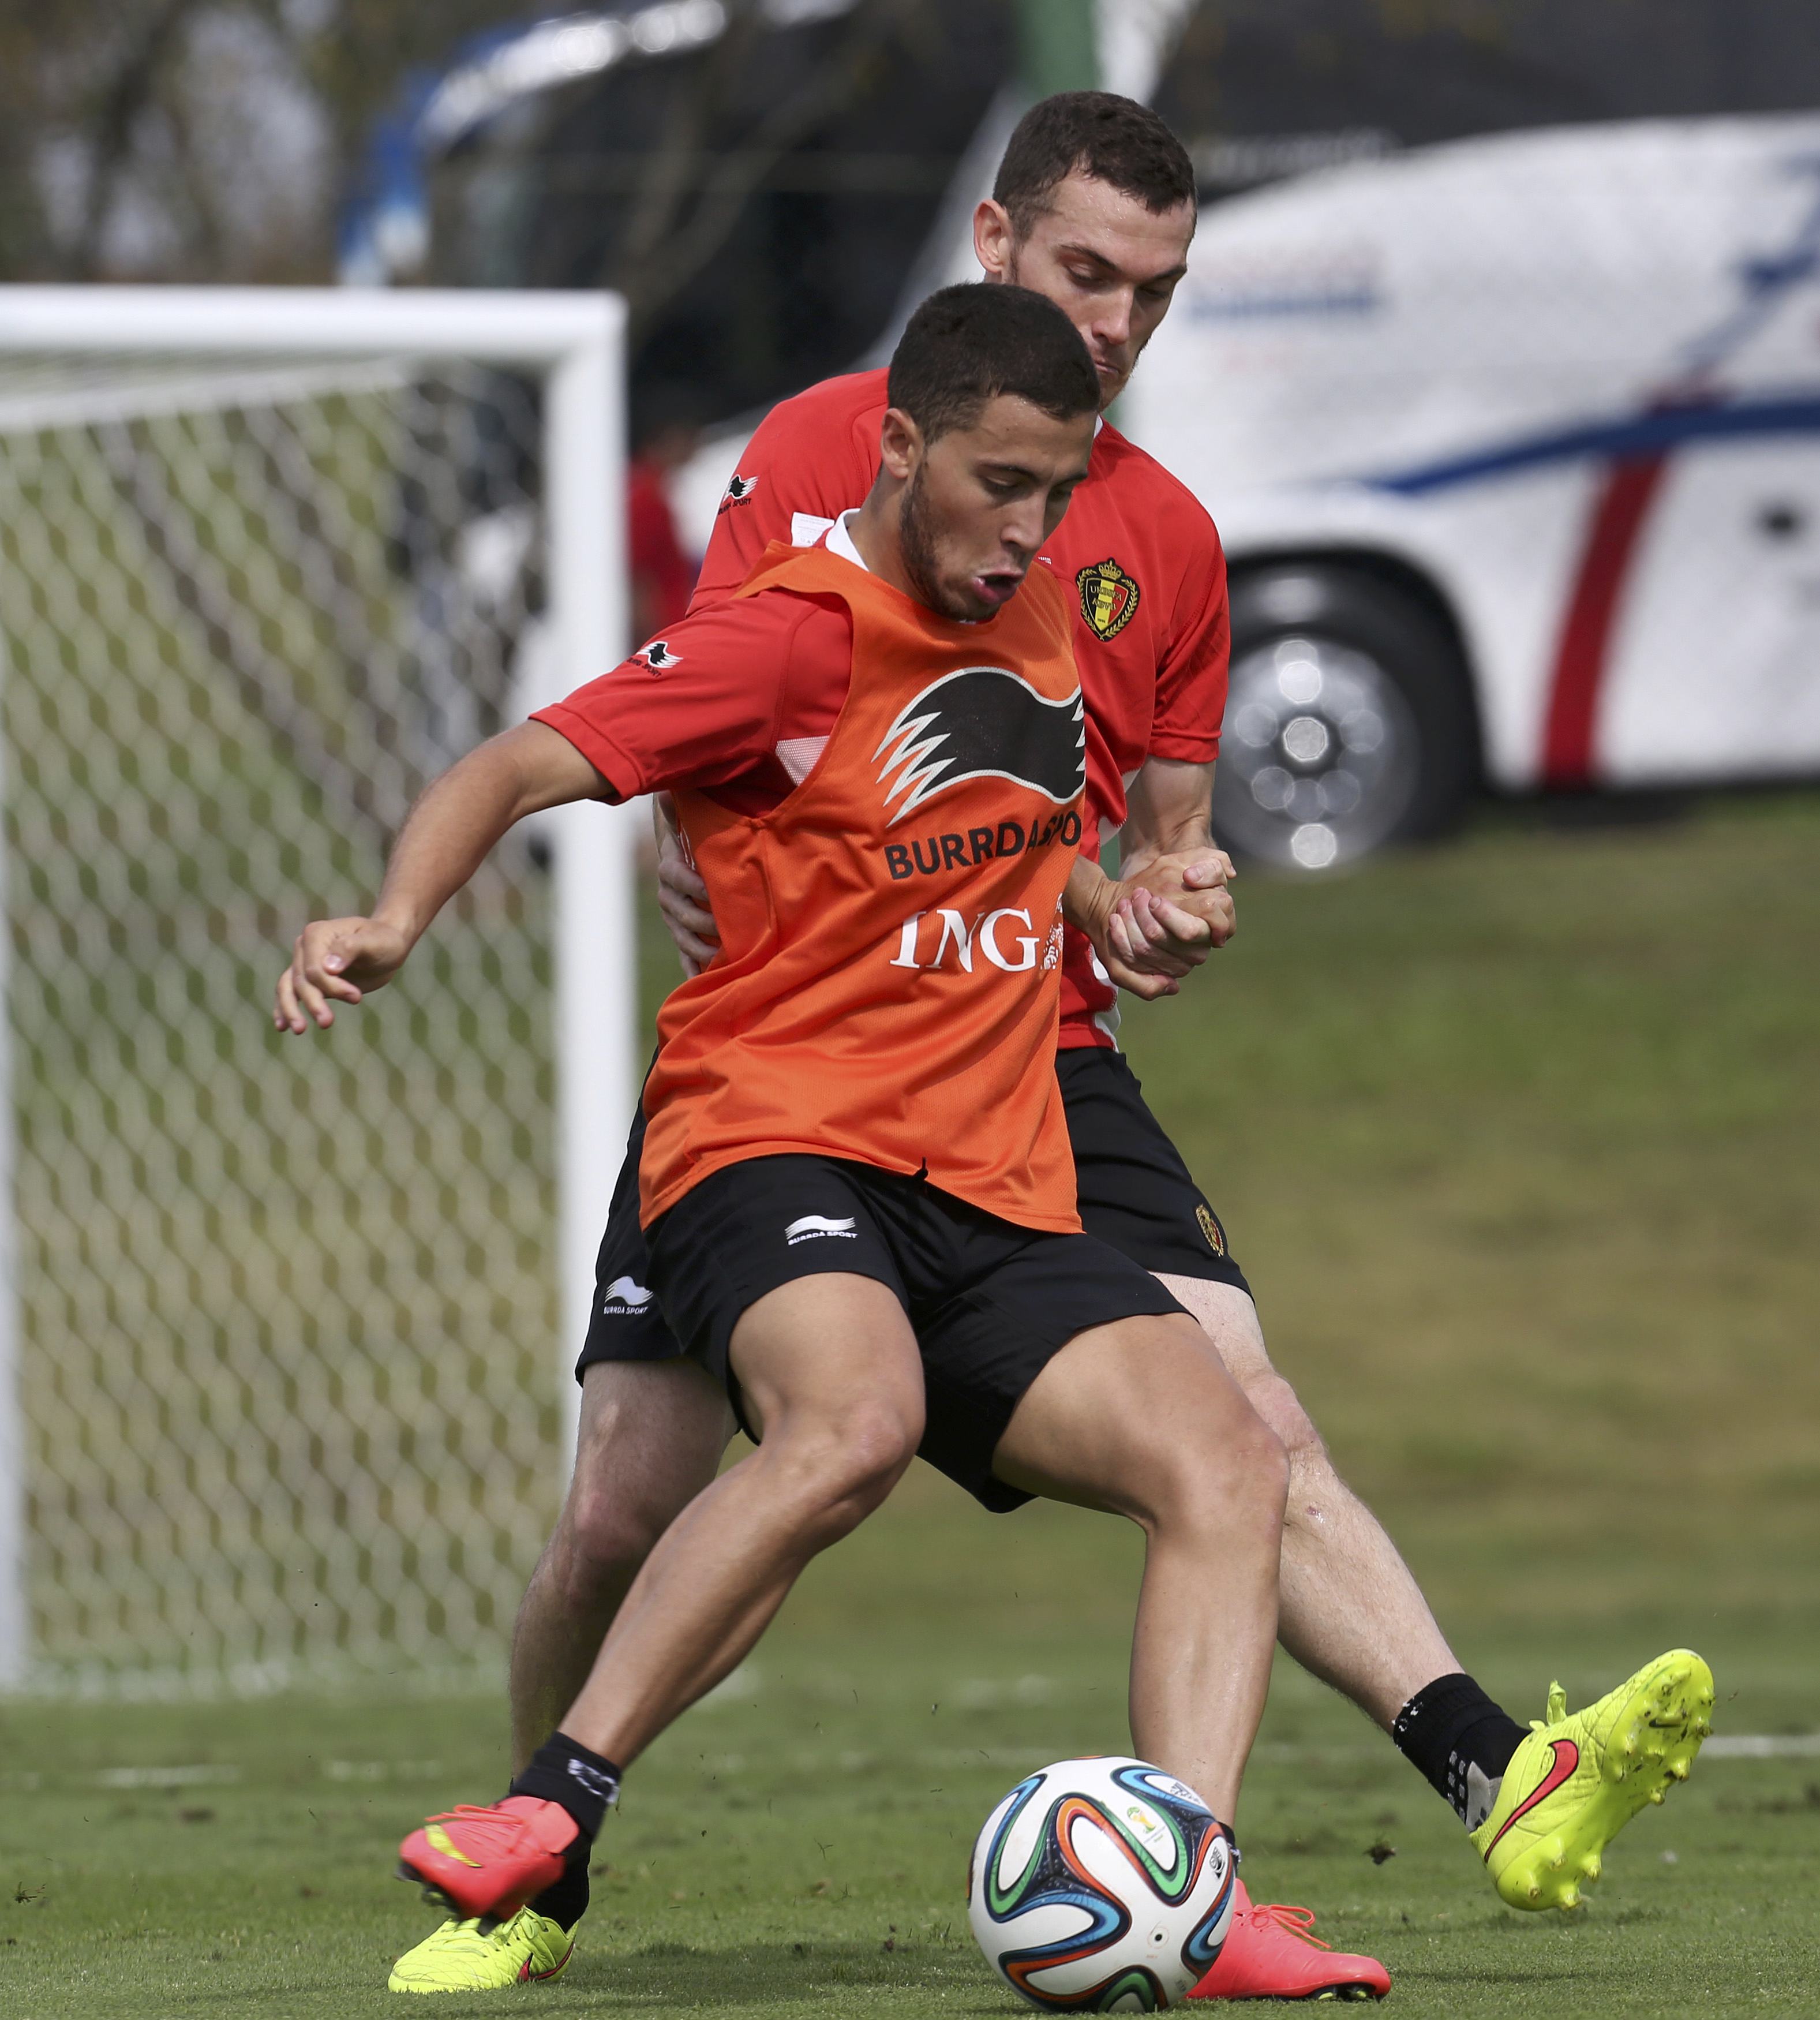 Belgium's national soccer team players Eden Hazard (Front) and Thomas Vermaelen fight for the ball during a training session in Mogi das Cruzes, near Sao Paulo June 14, 2014. Belgium will play its first match of the 2014 World Cup against Algeria on June 